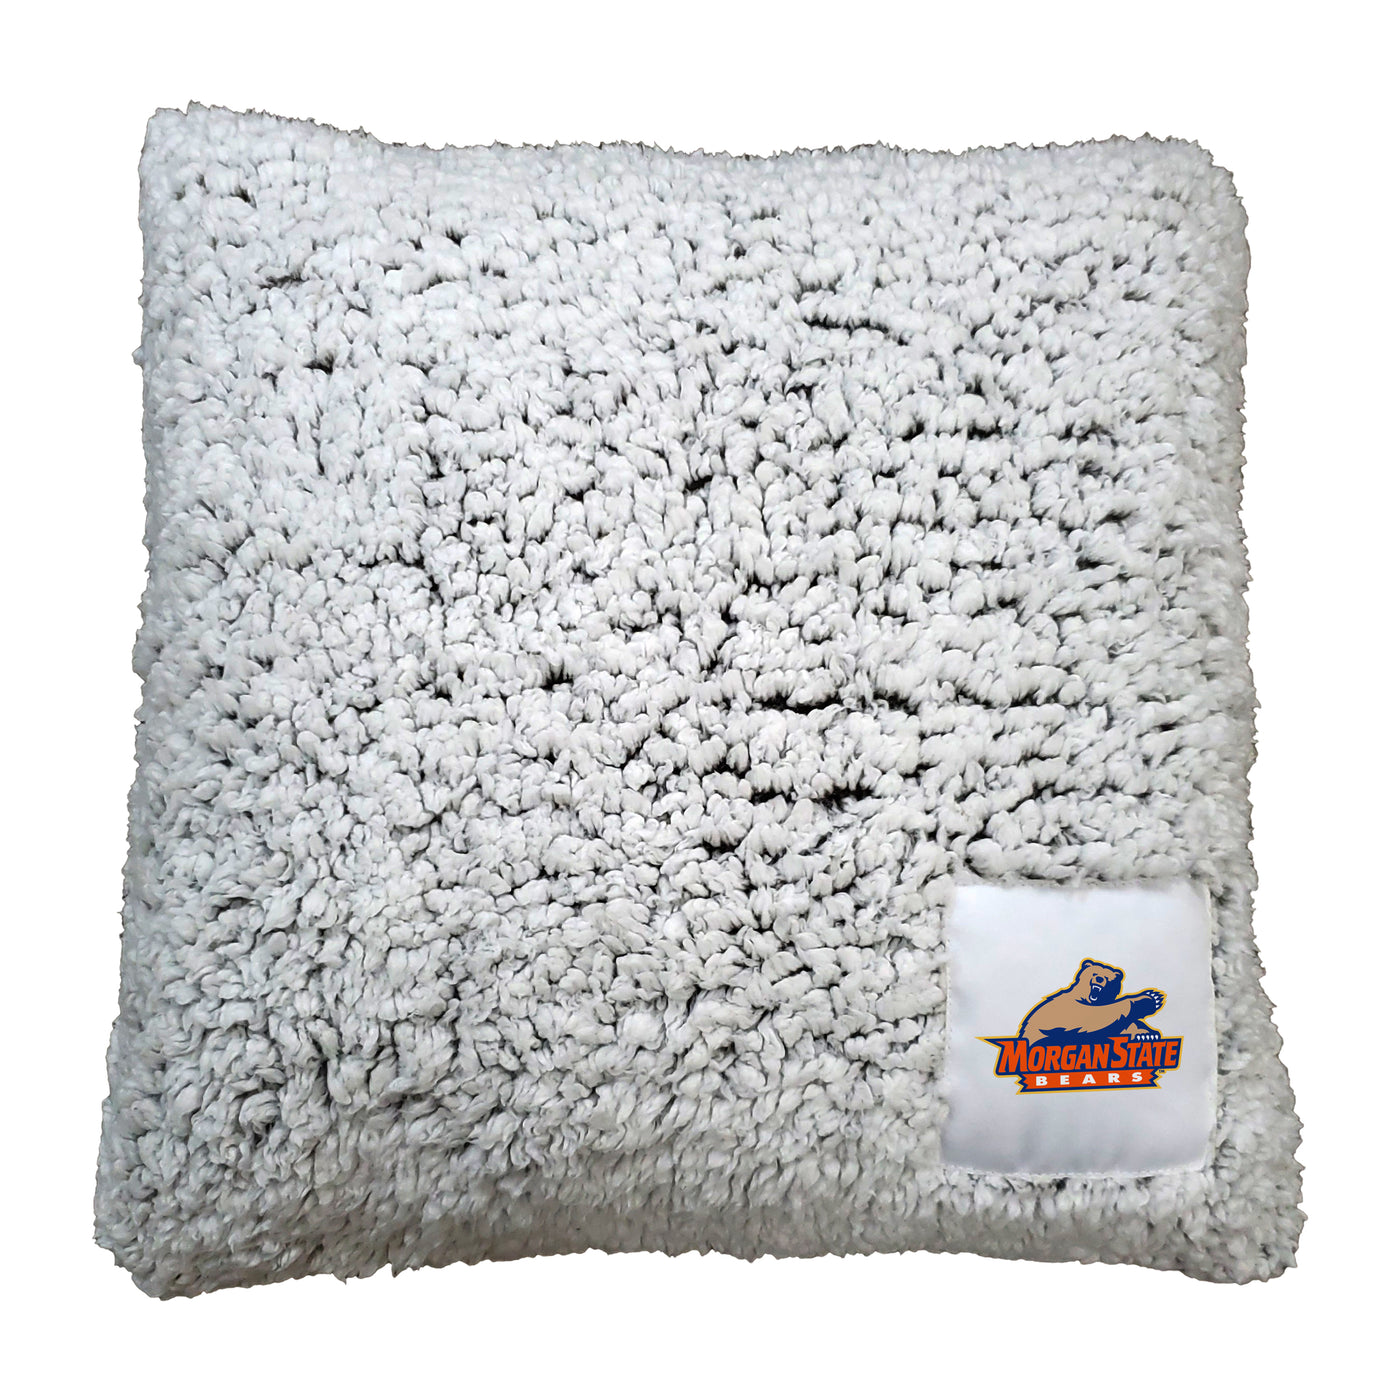 Morgan State Frosty Pillow